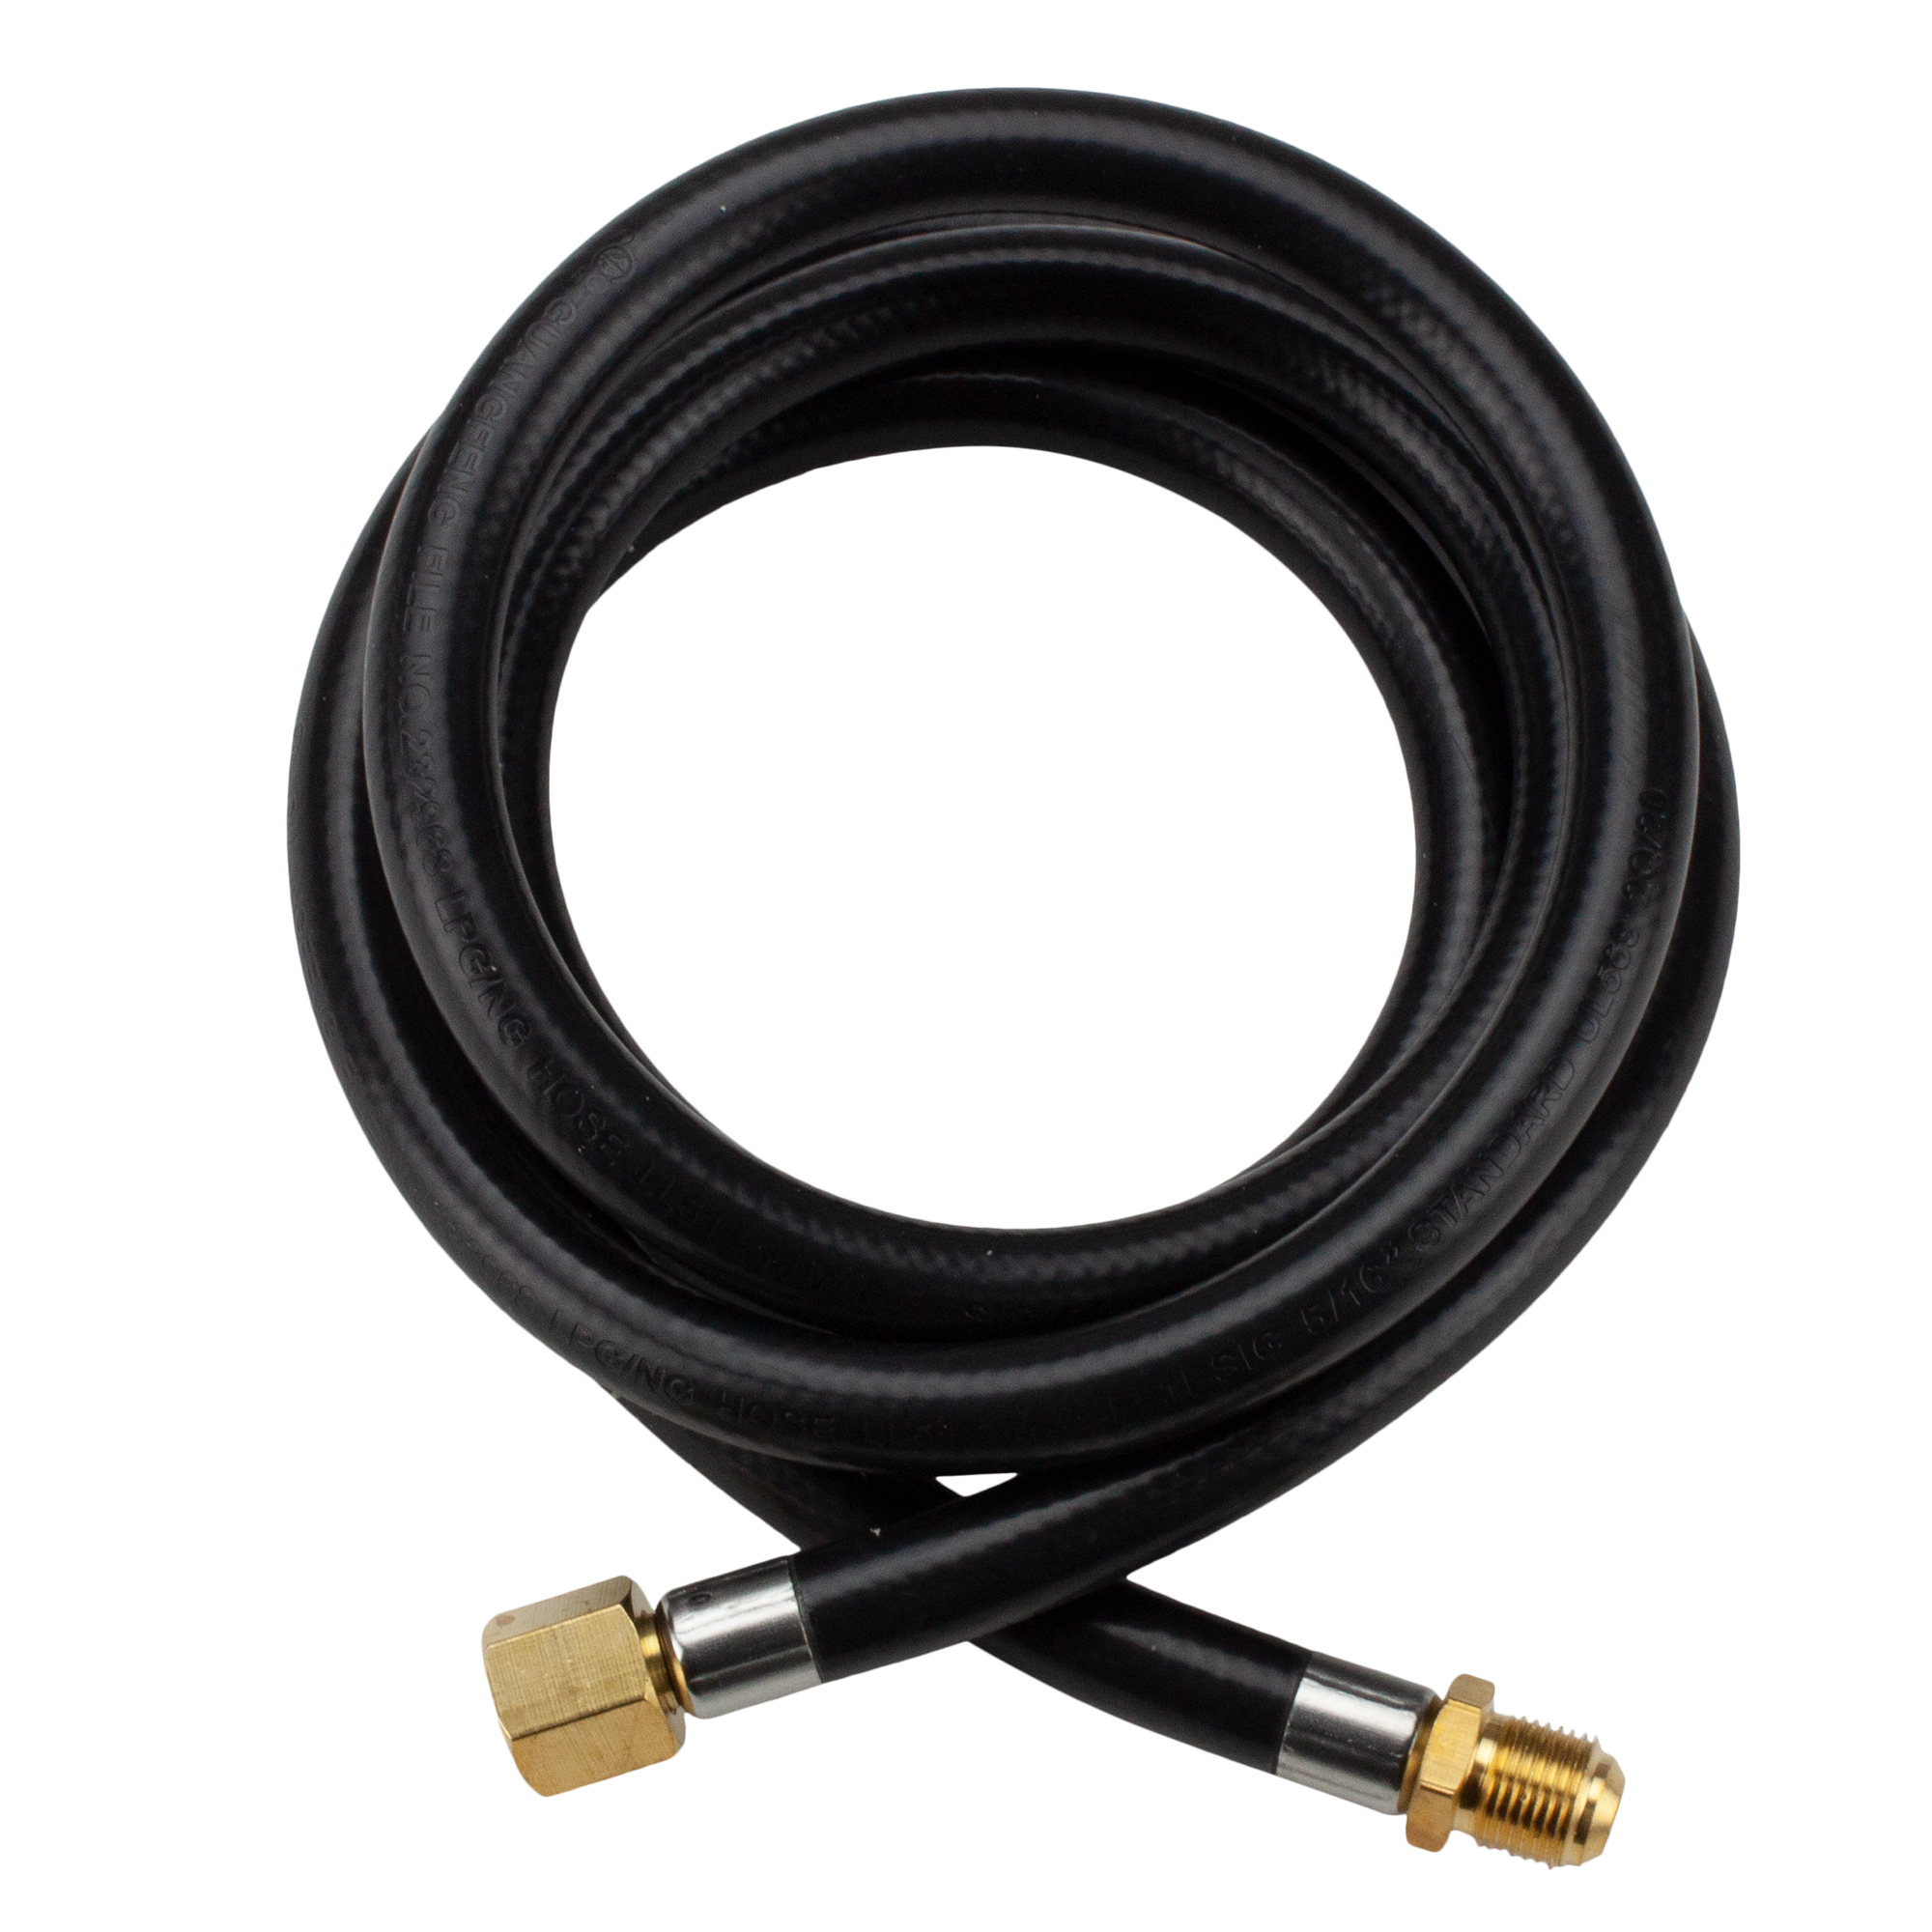 6' Gas Extension Hose for outdoor fire pits